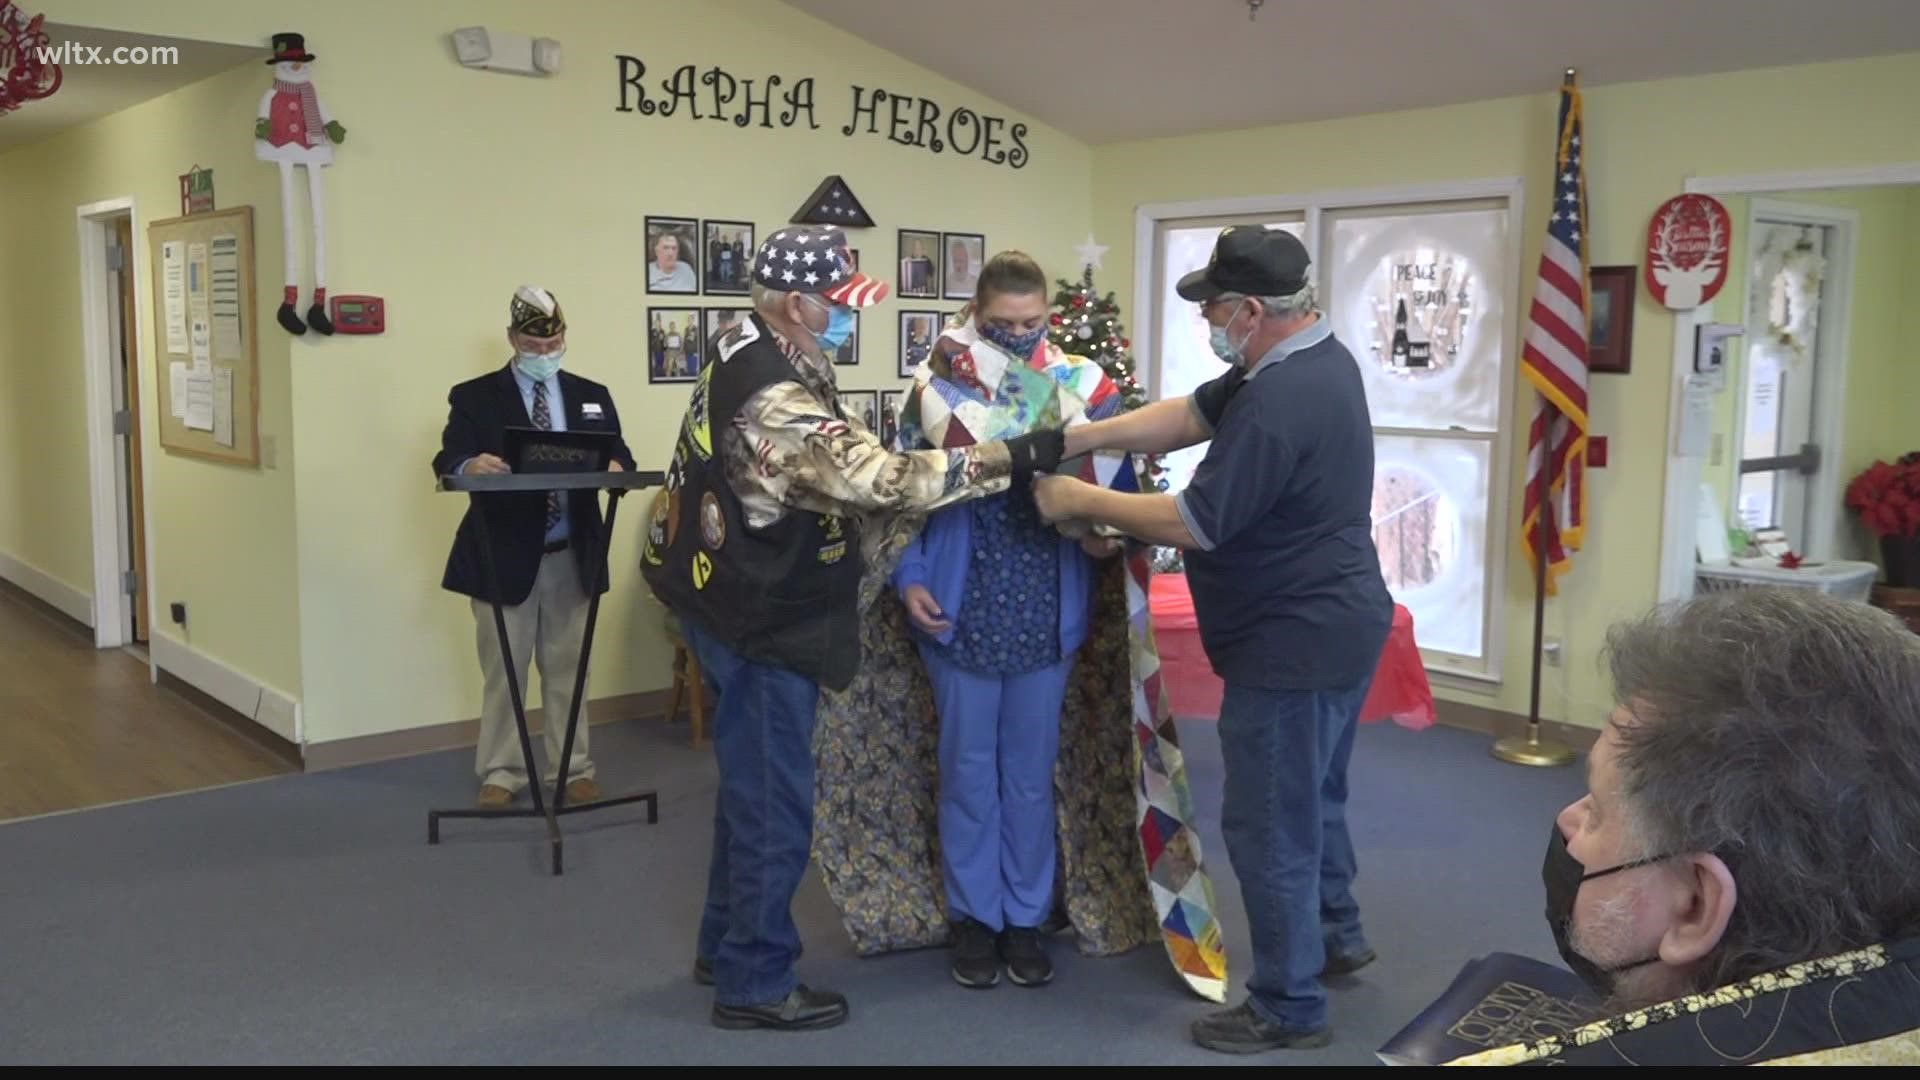 Twenty two veterans were honored with the homemade quilts to thank them for their military service.